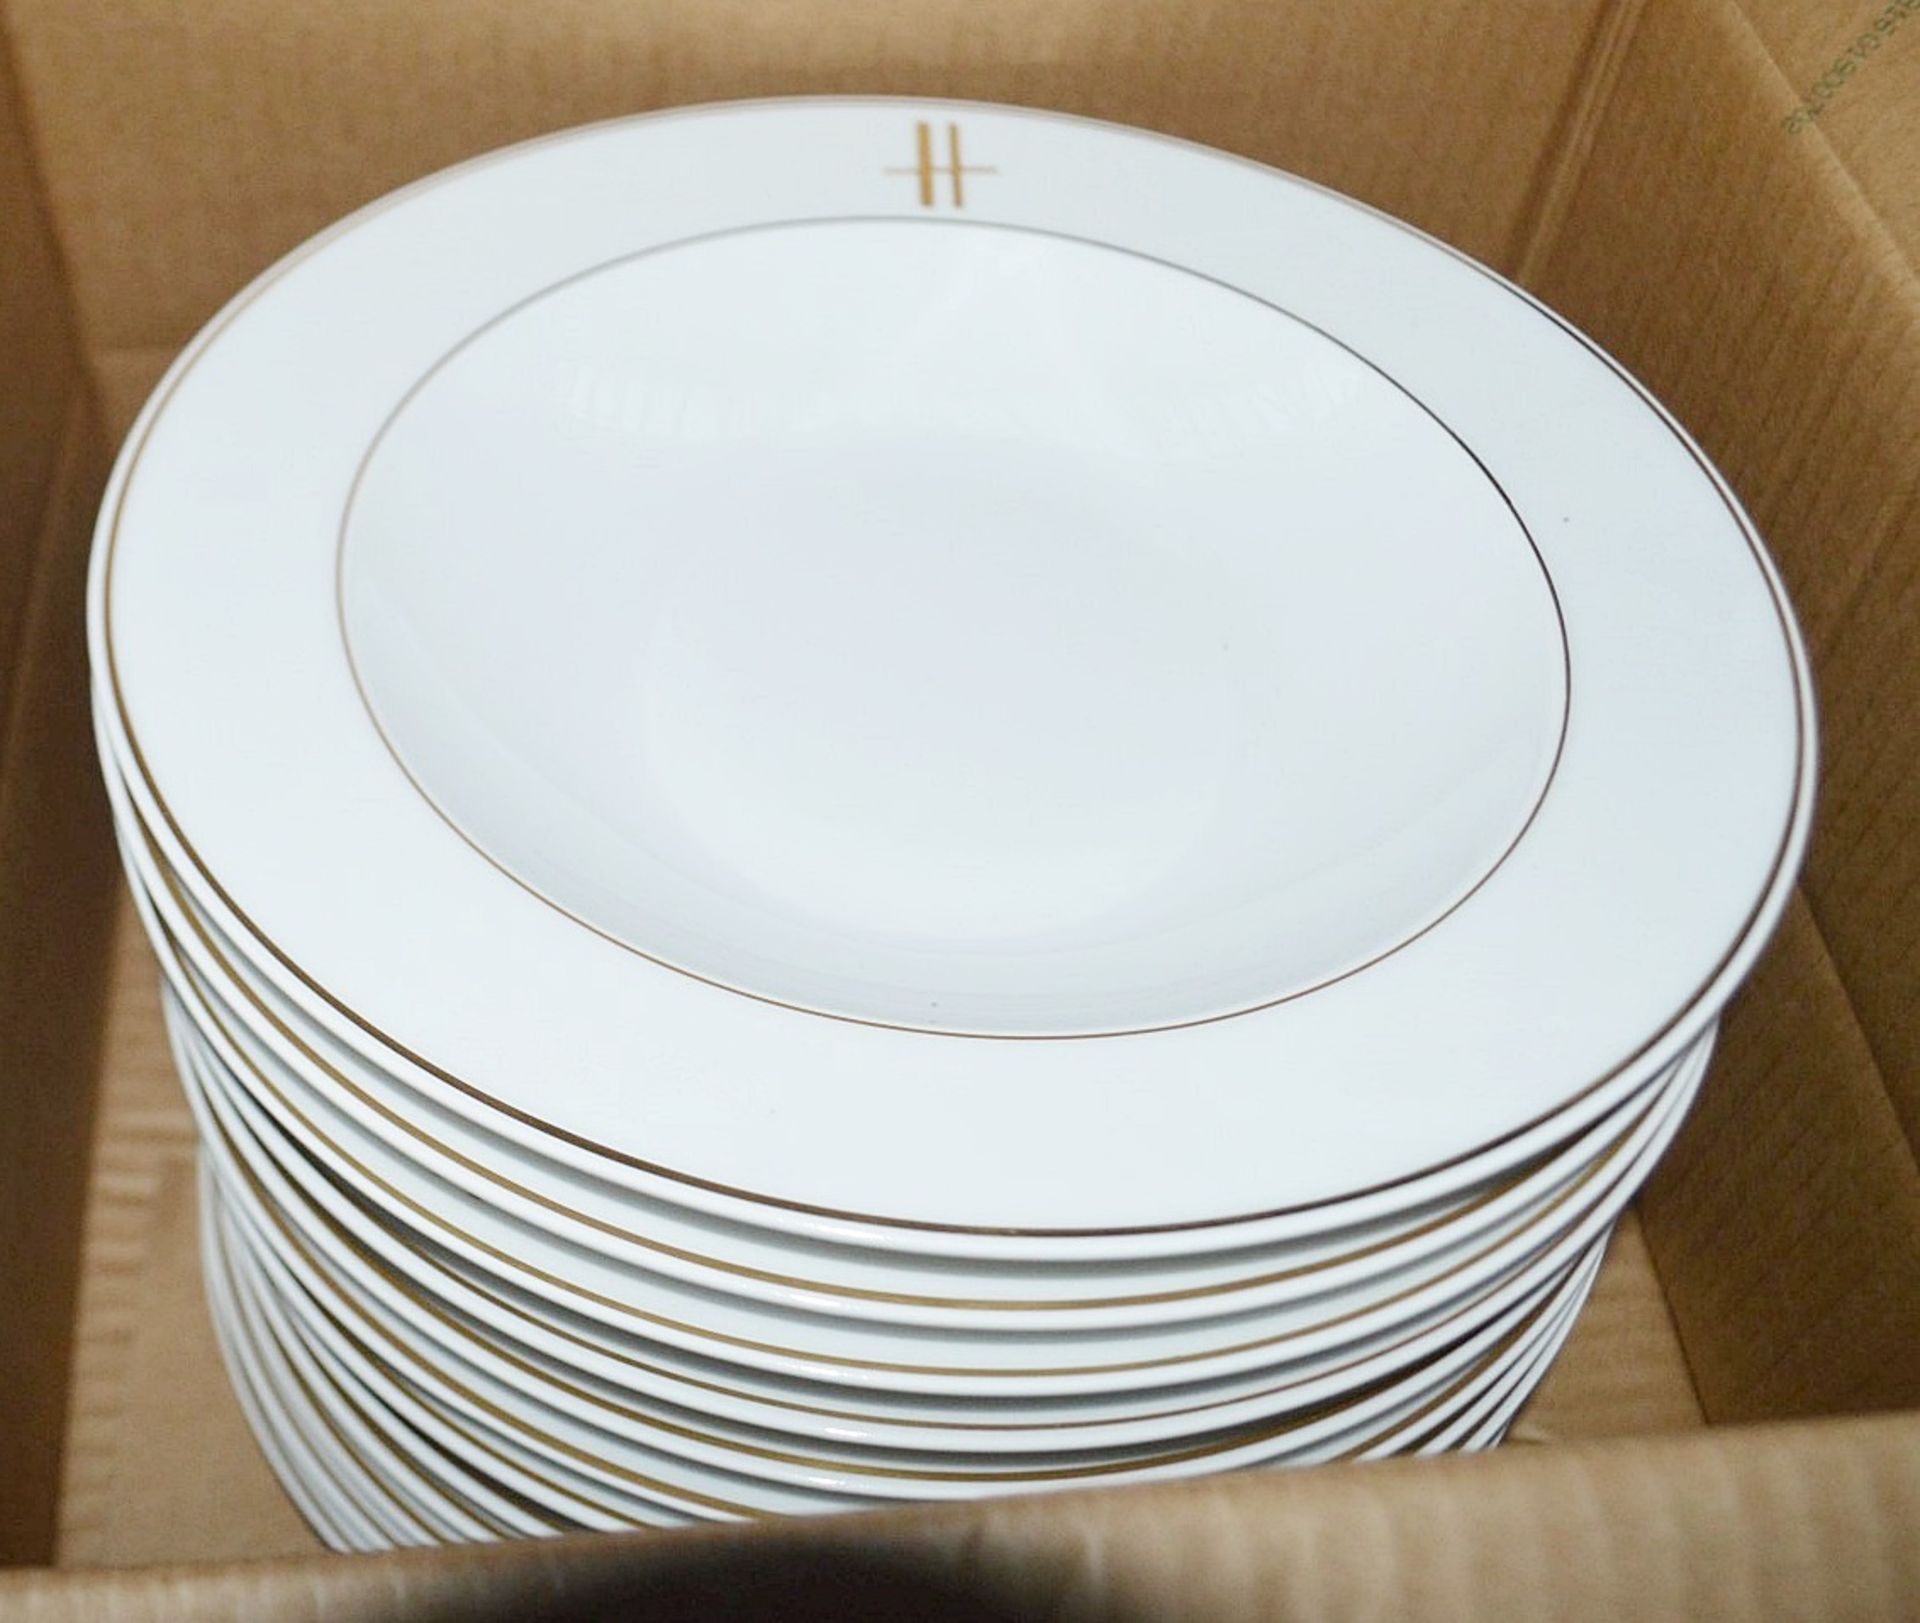 12 x PILLIVUYT Porcelain 27cm Pasta / Soup Plates In White Featuring 'Famous Branding' In Gold - - Image 5 of 5